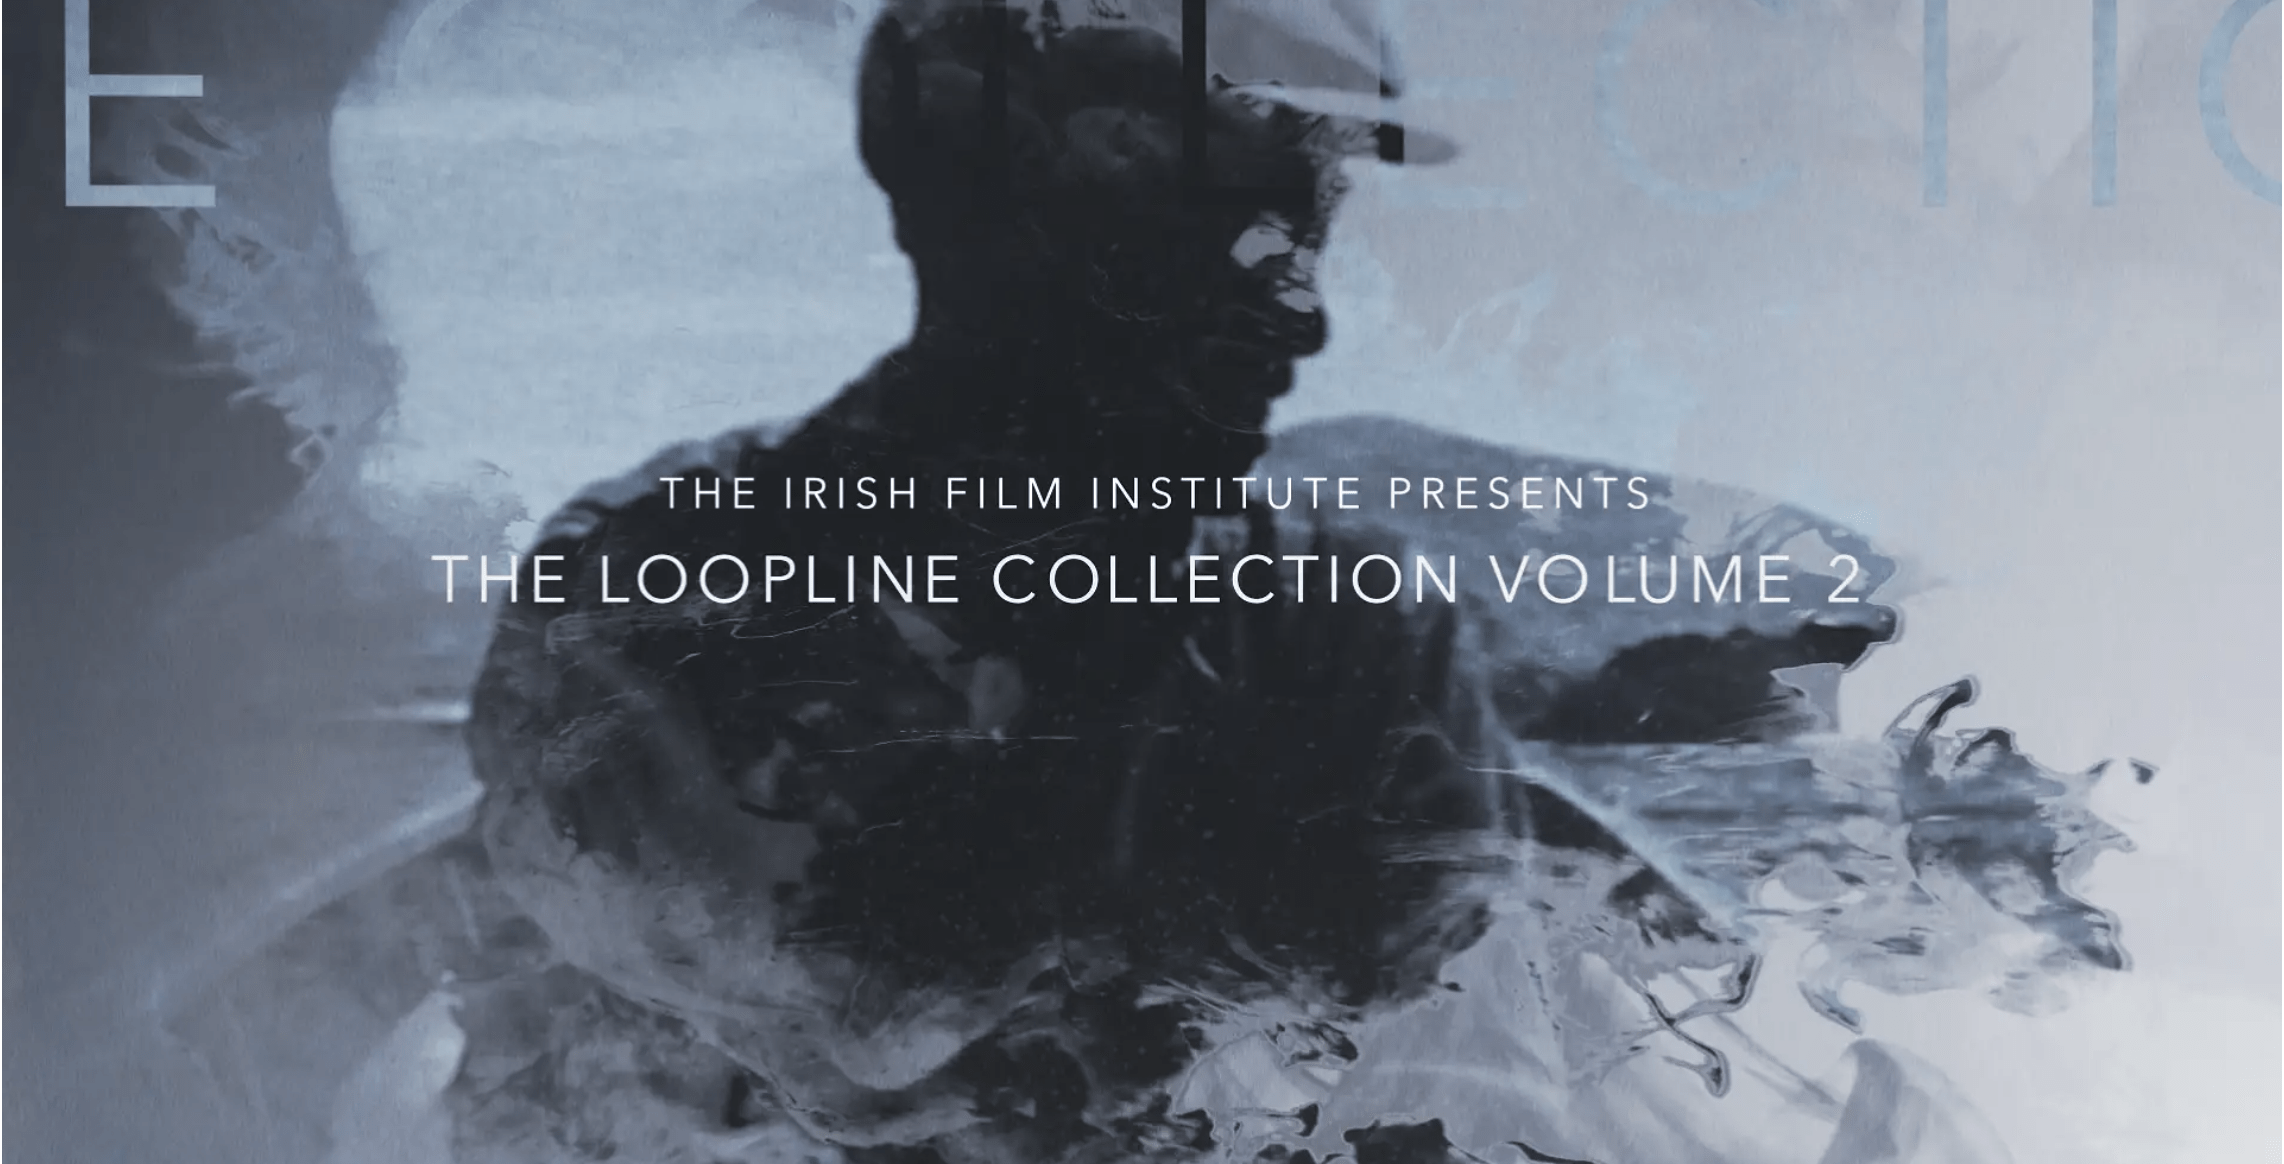 The Loopline Collection Vol. 2